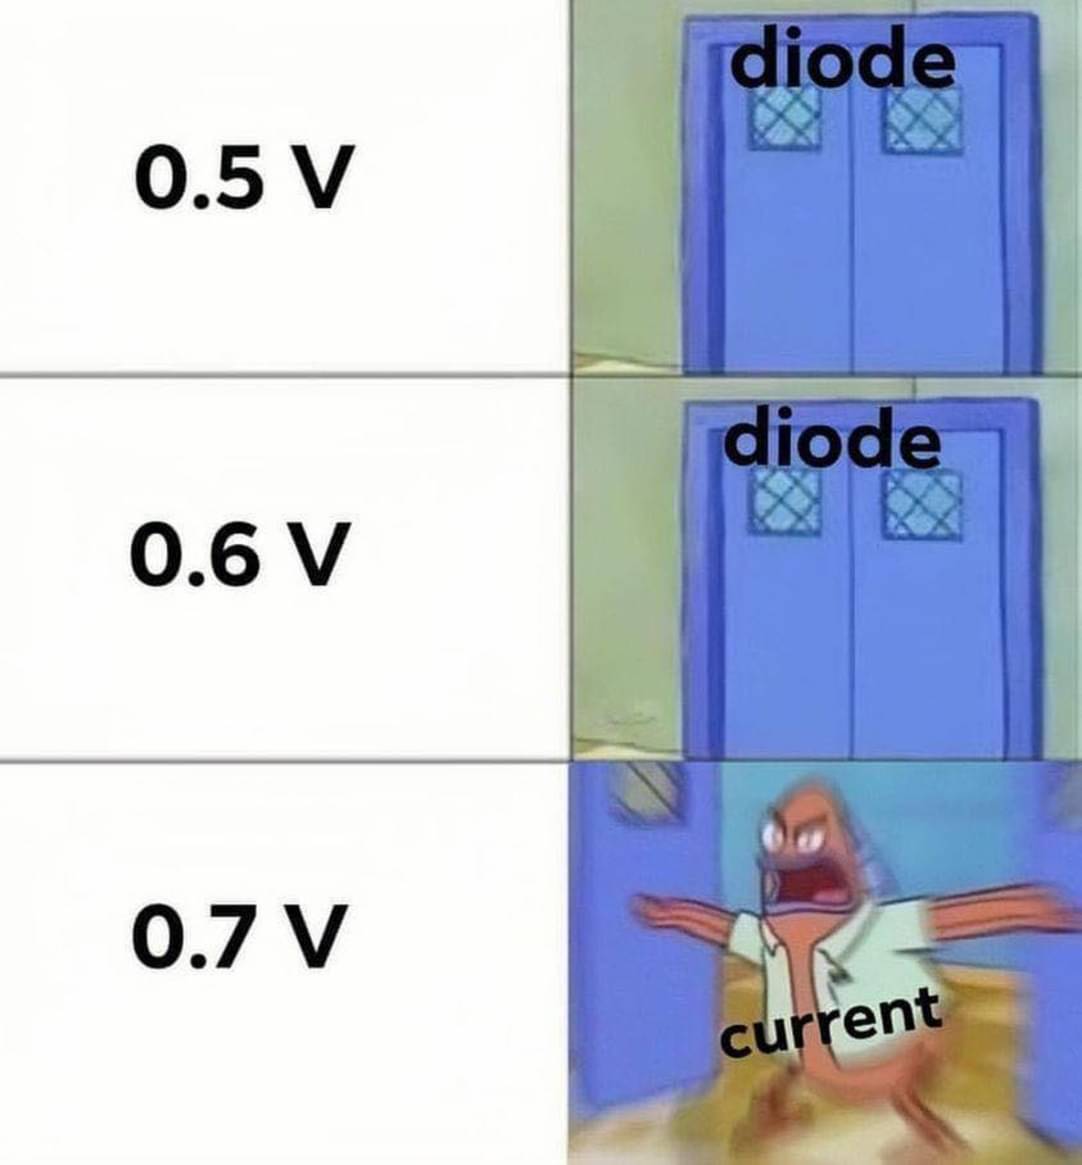 diode_current.jpg